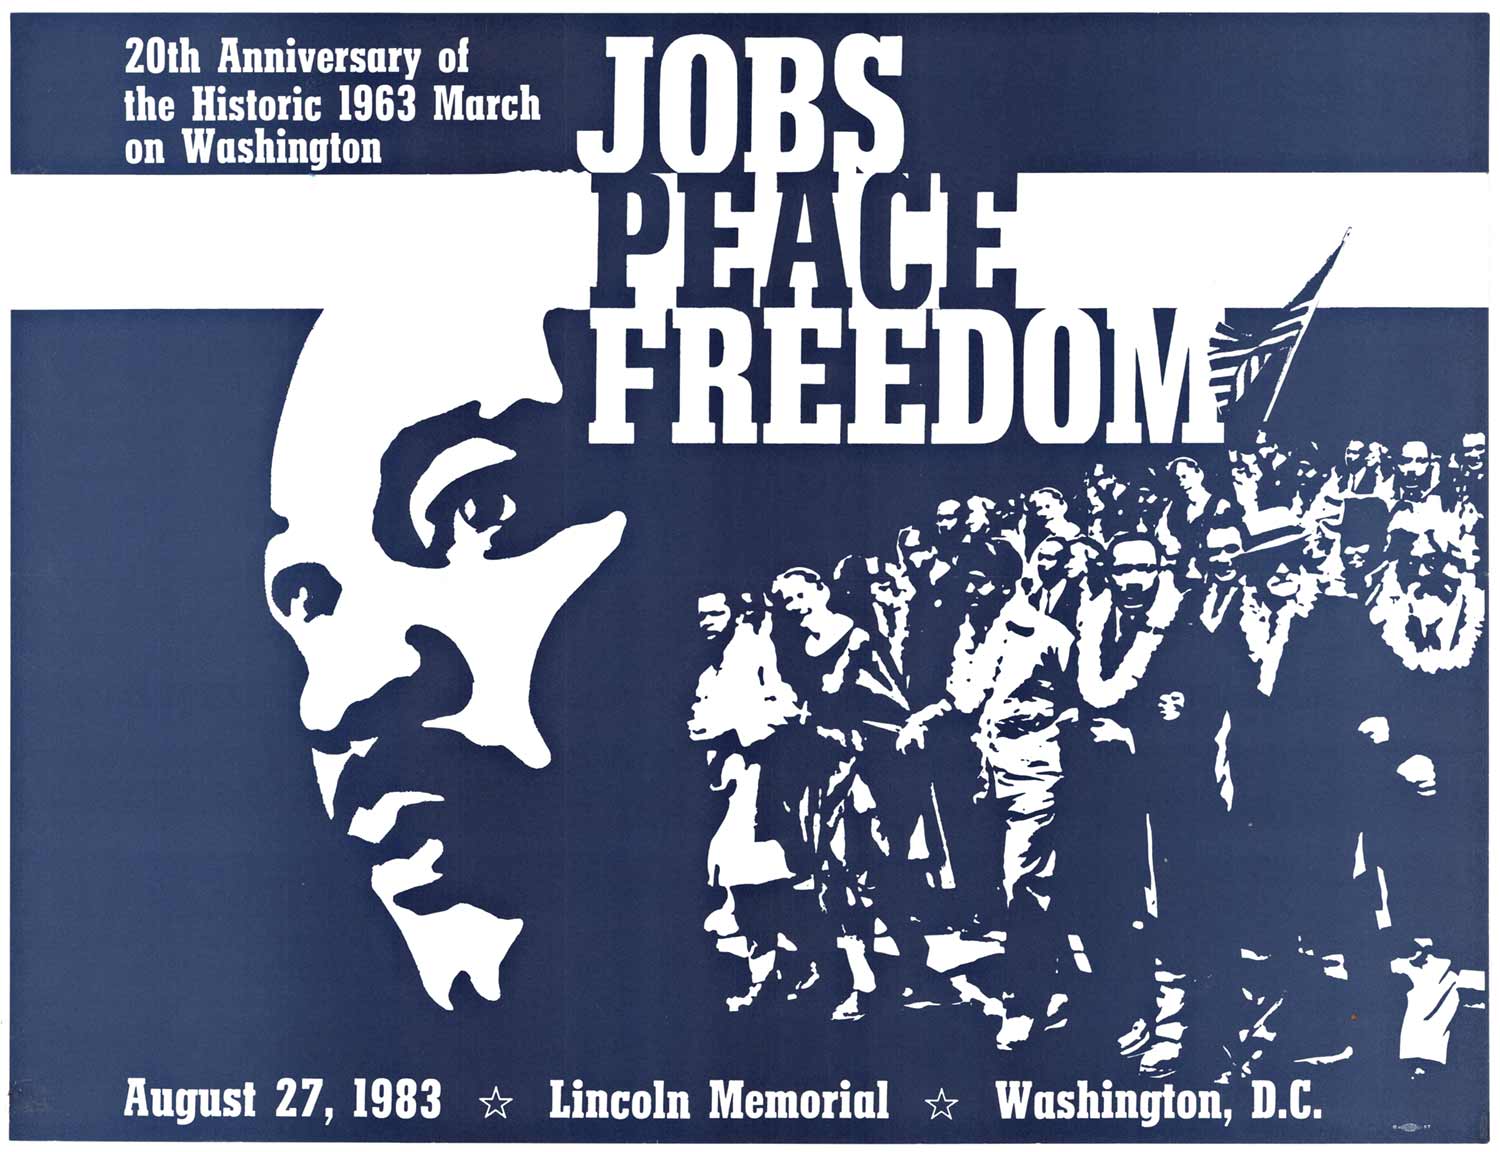 Original Jobs, Peace, Freedom. 20th Anniversary of the Historic 1963 March on Washington. August 37, 19983. Lincoln Memorial, Washington, D.C. vintage poster. Archival linen backed and ready to frame. Very good to fine condition. A